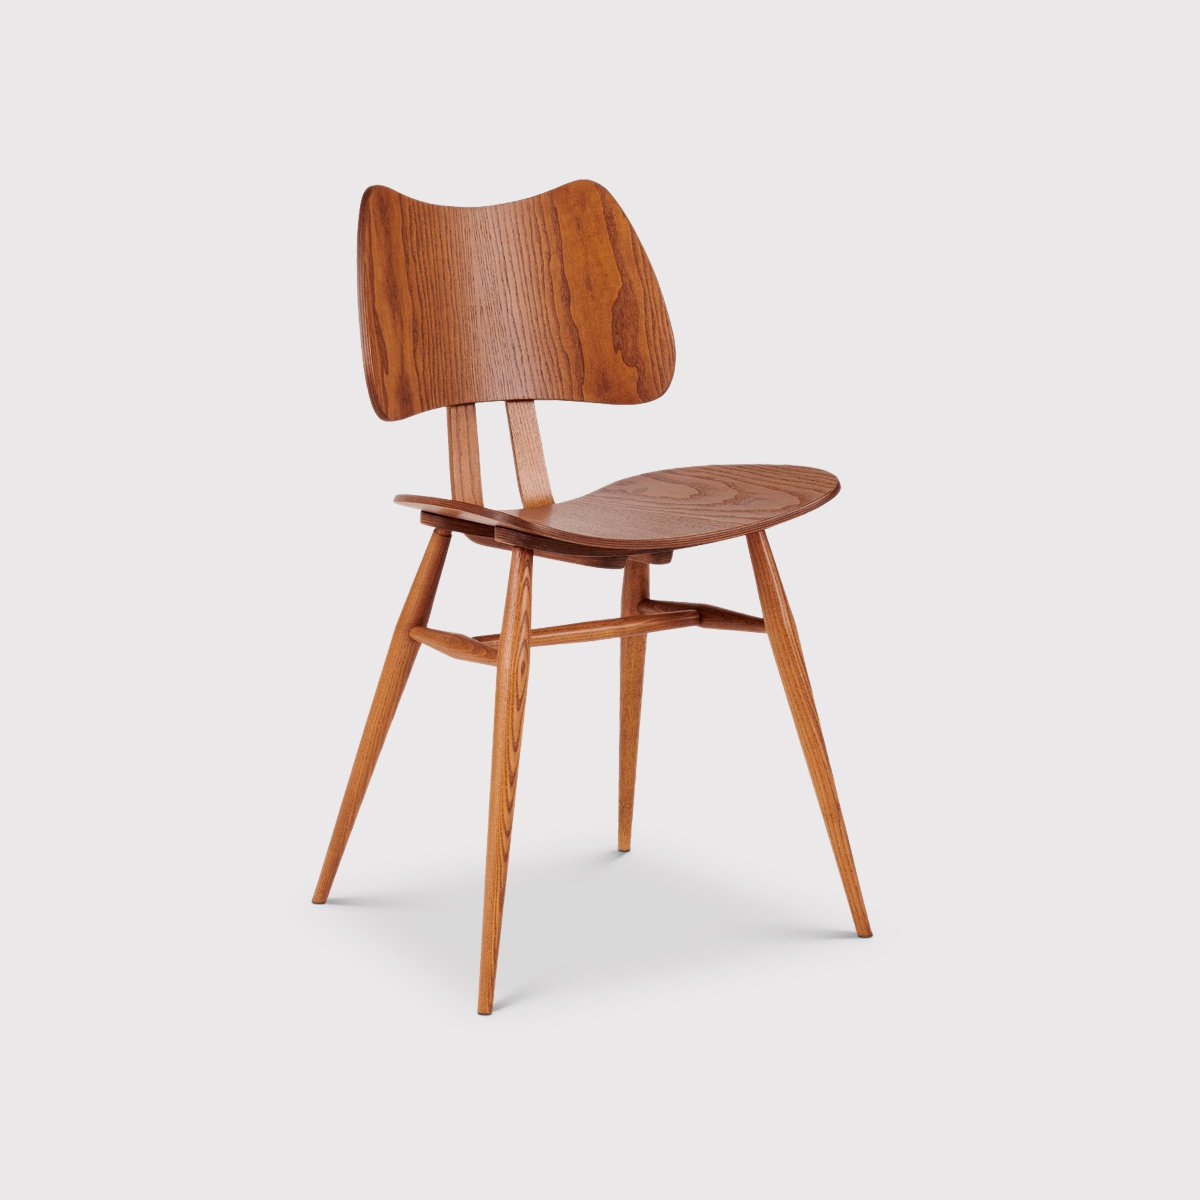 L.Ercolani Butterfly Dining Chair, Timber Wood | Barker & Stonehouse